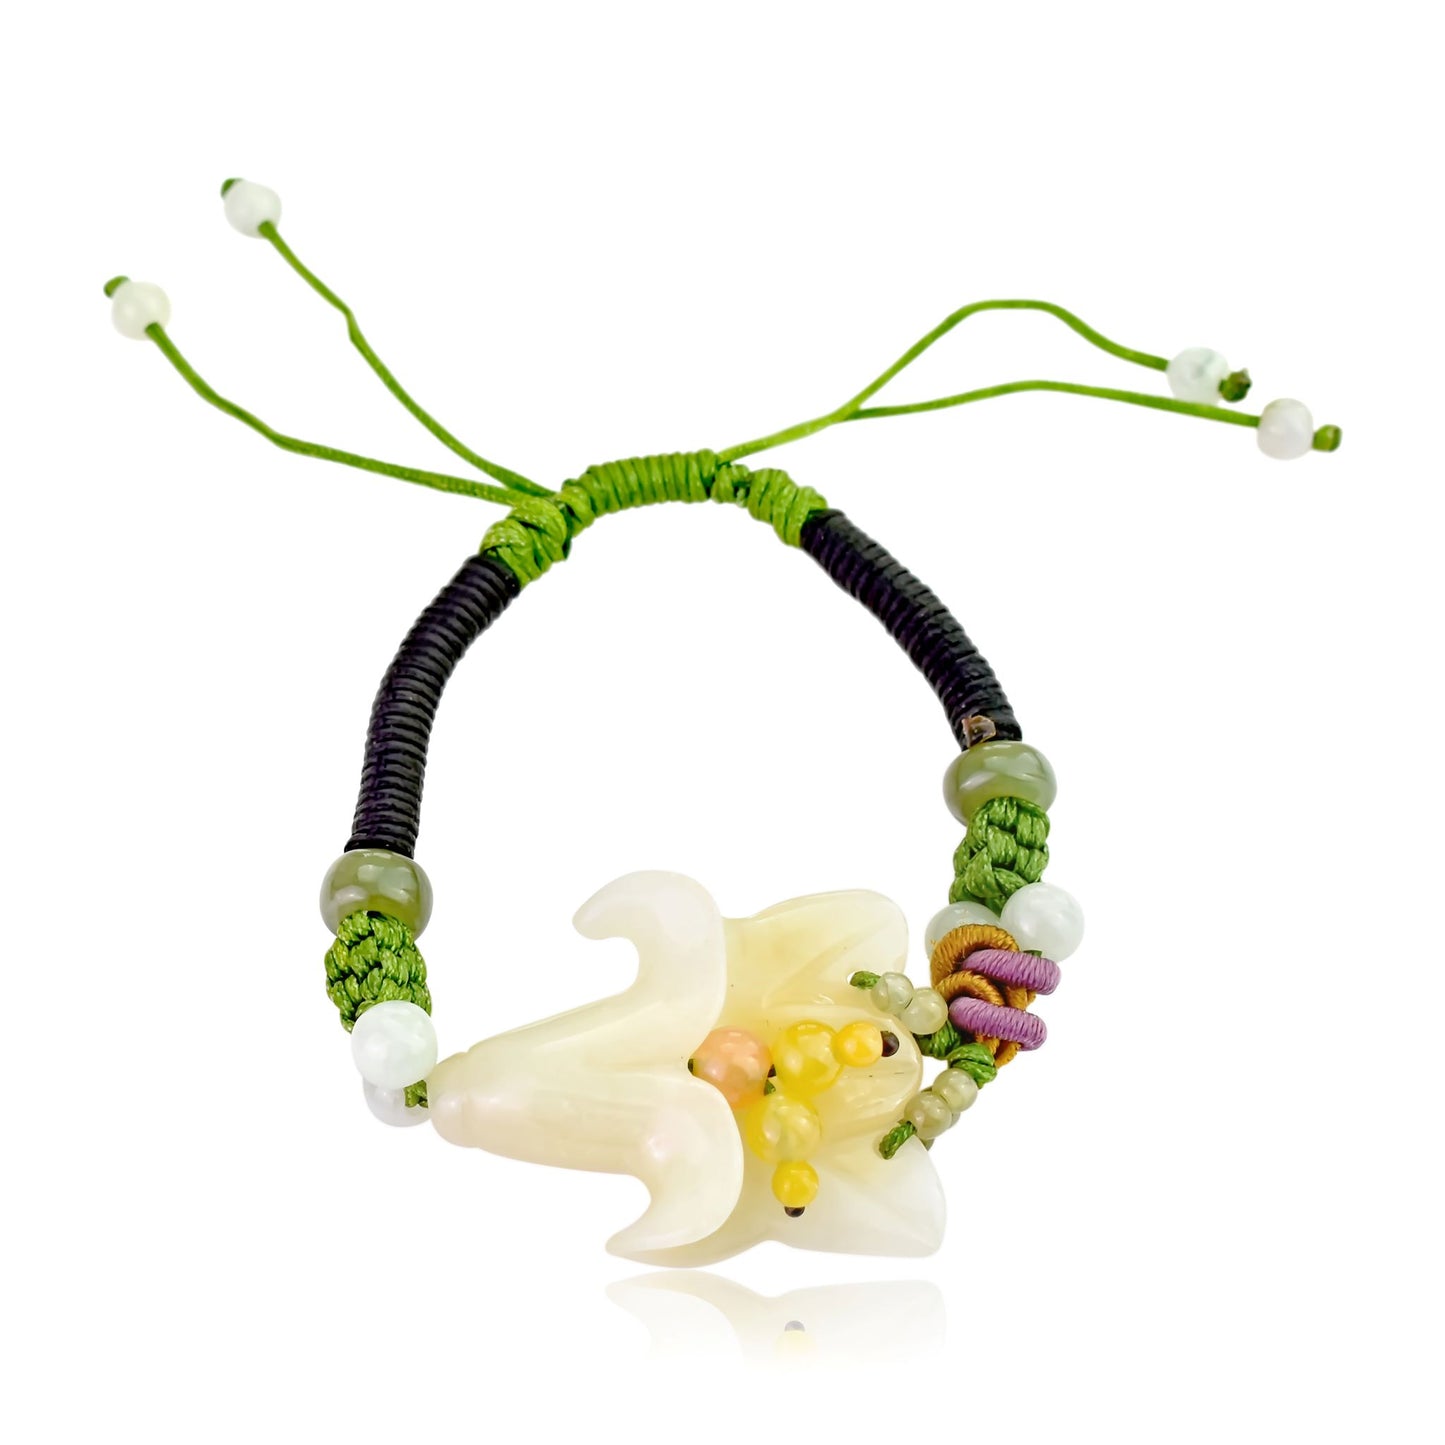 Stand Out with a Colorful Bellflower Handmade Jade Bracelet with Black Cord